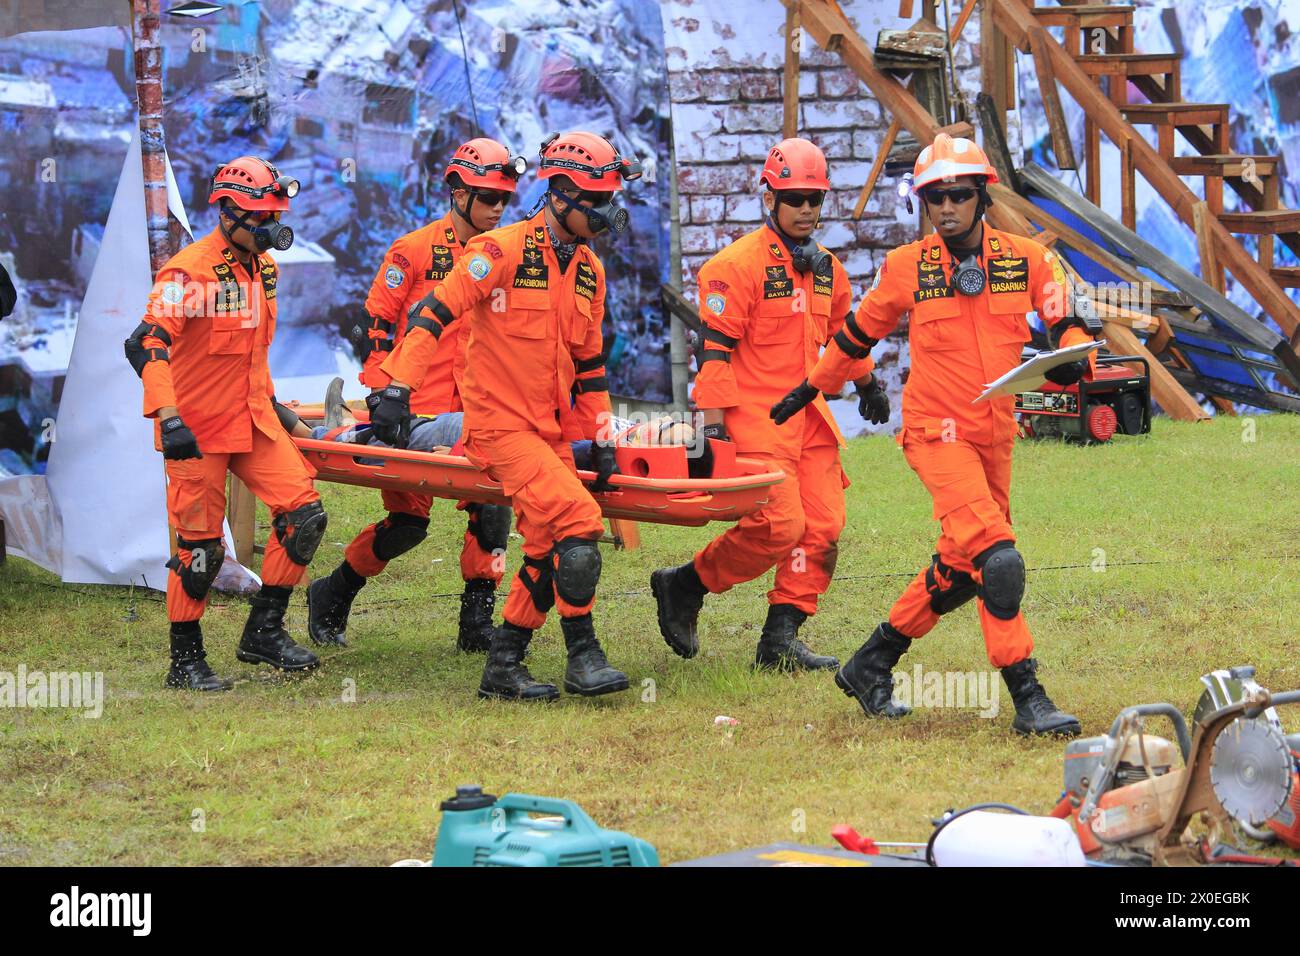 Action of the National Search and Rescue Agency BASARNAS evacuated victims of natural disasters in simulating earthquake response. Stock Photo